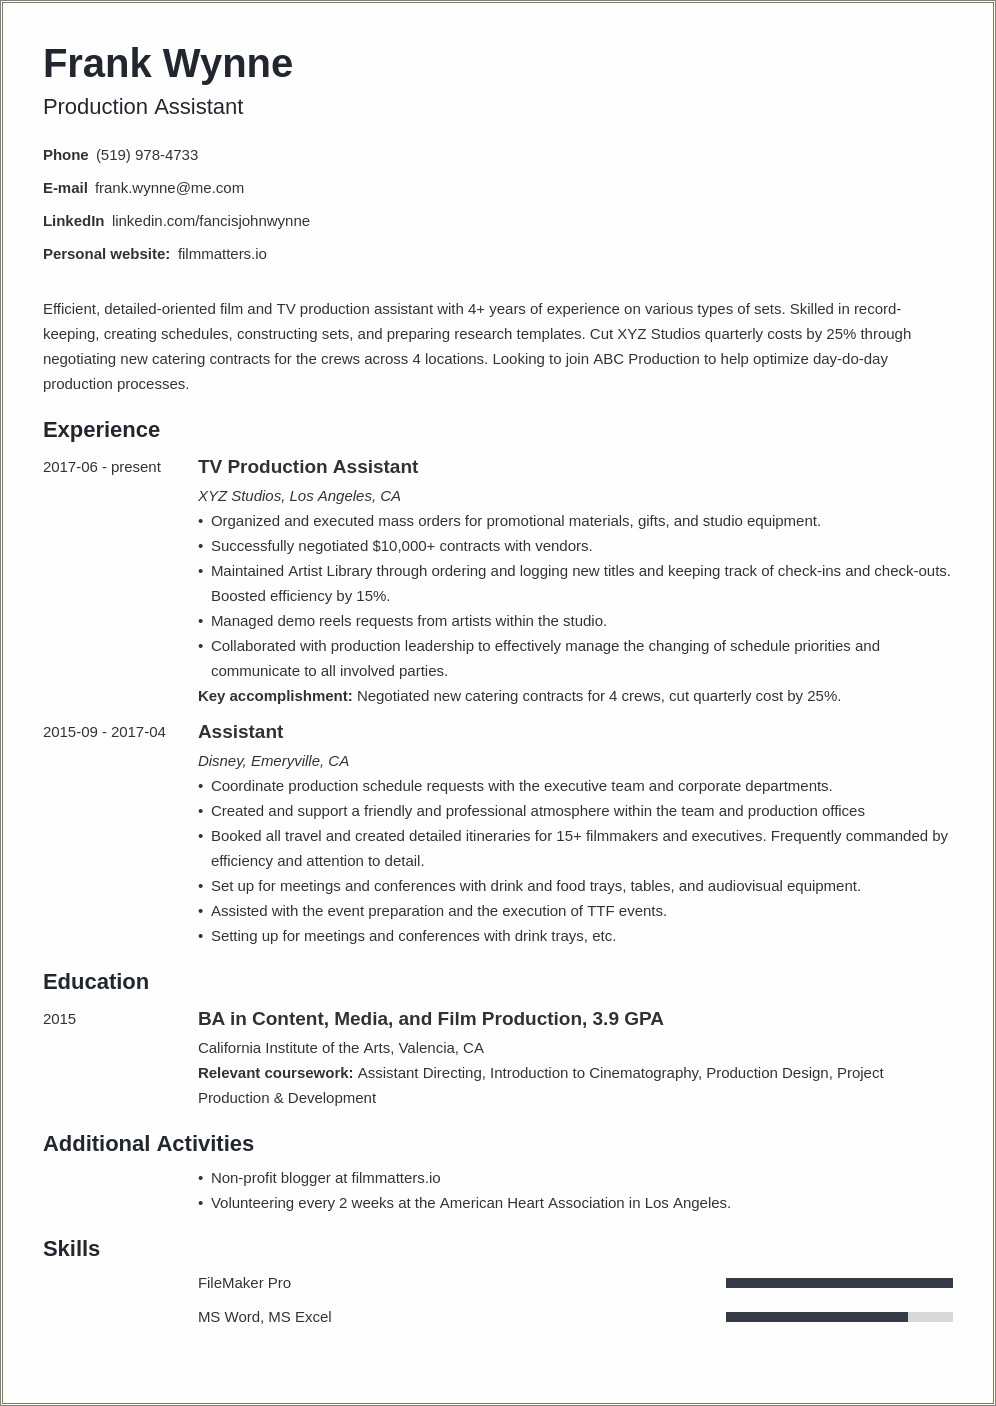 Production Assistant Resume Sample For Students